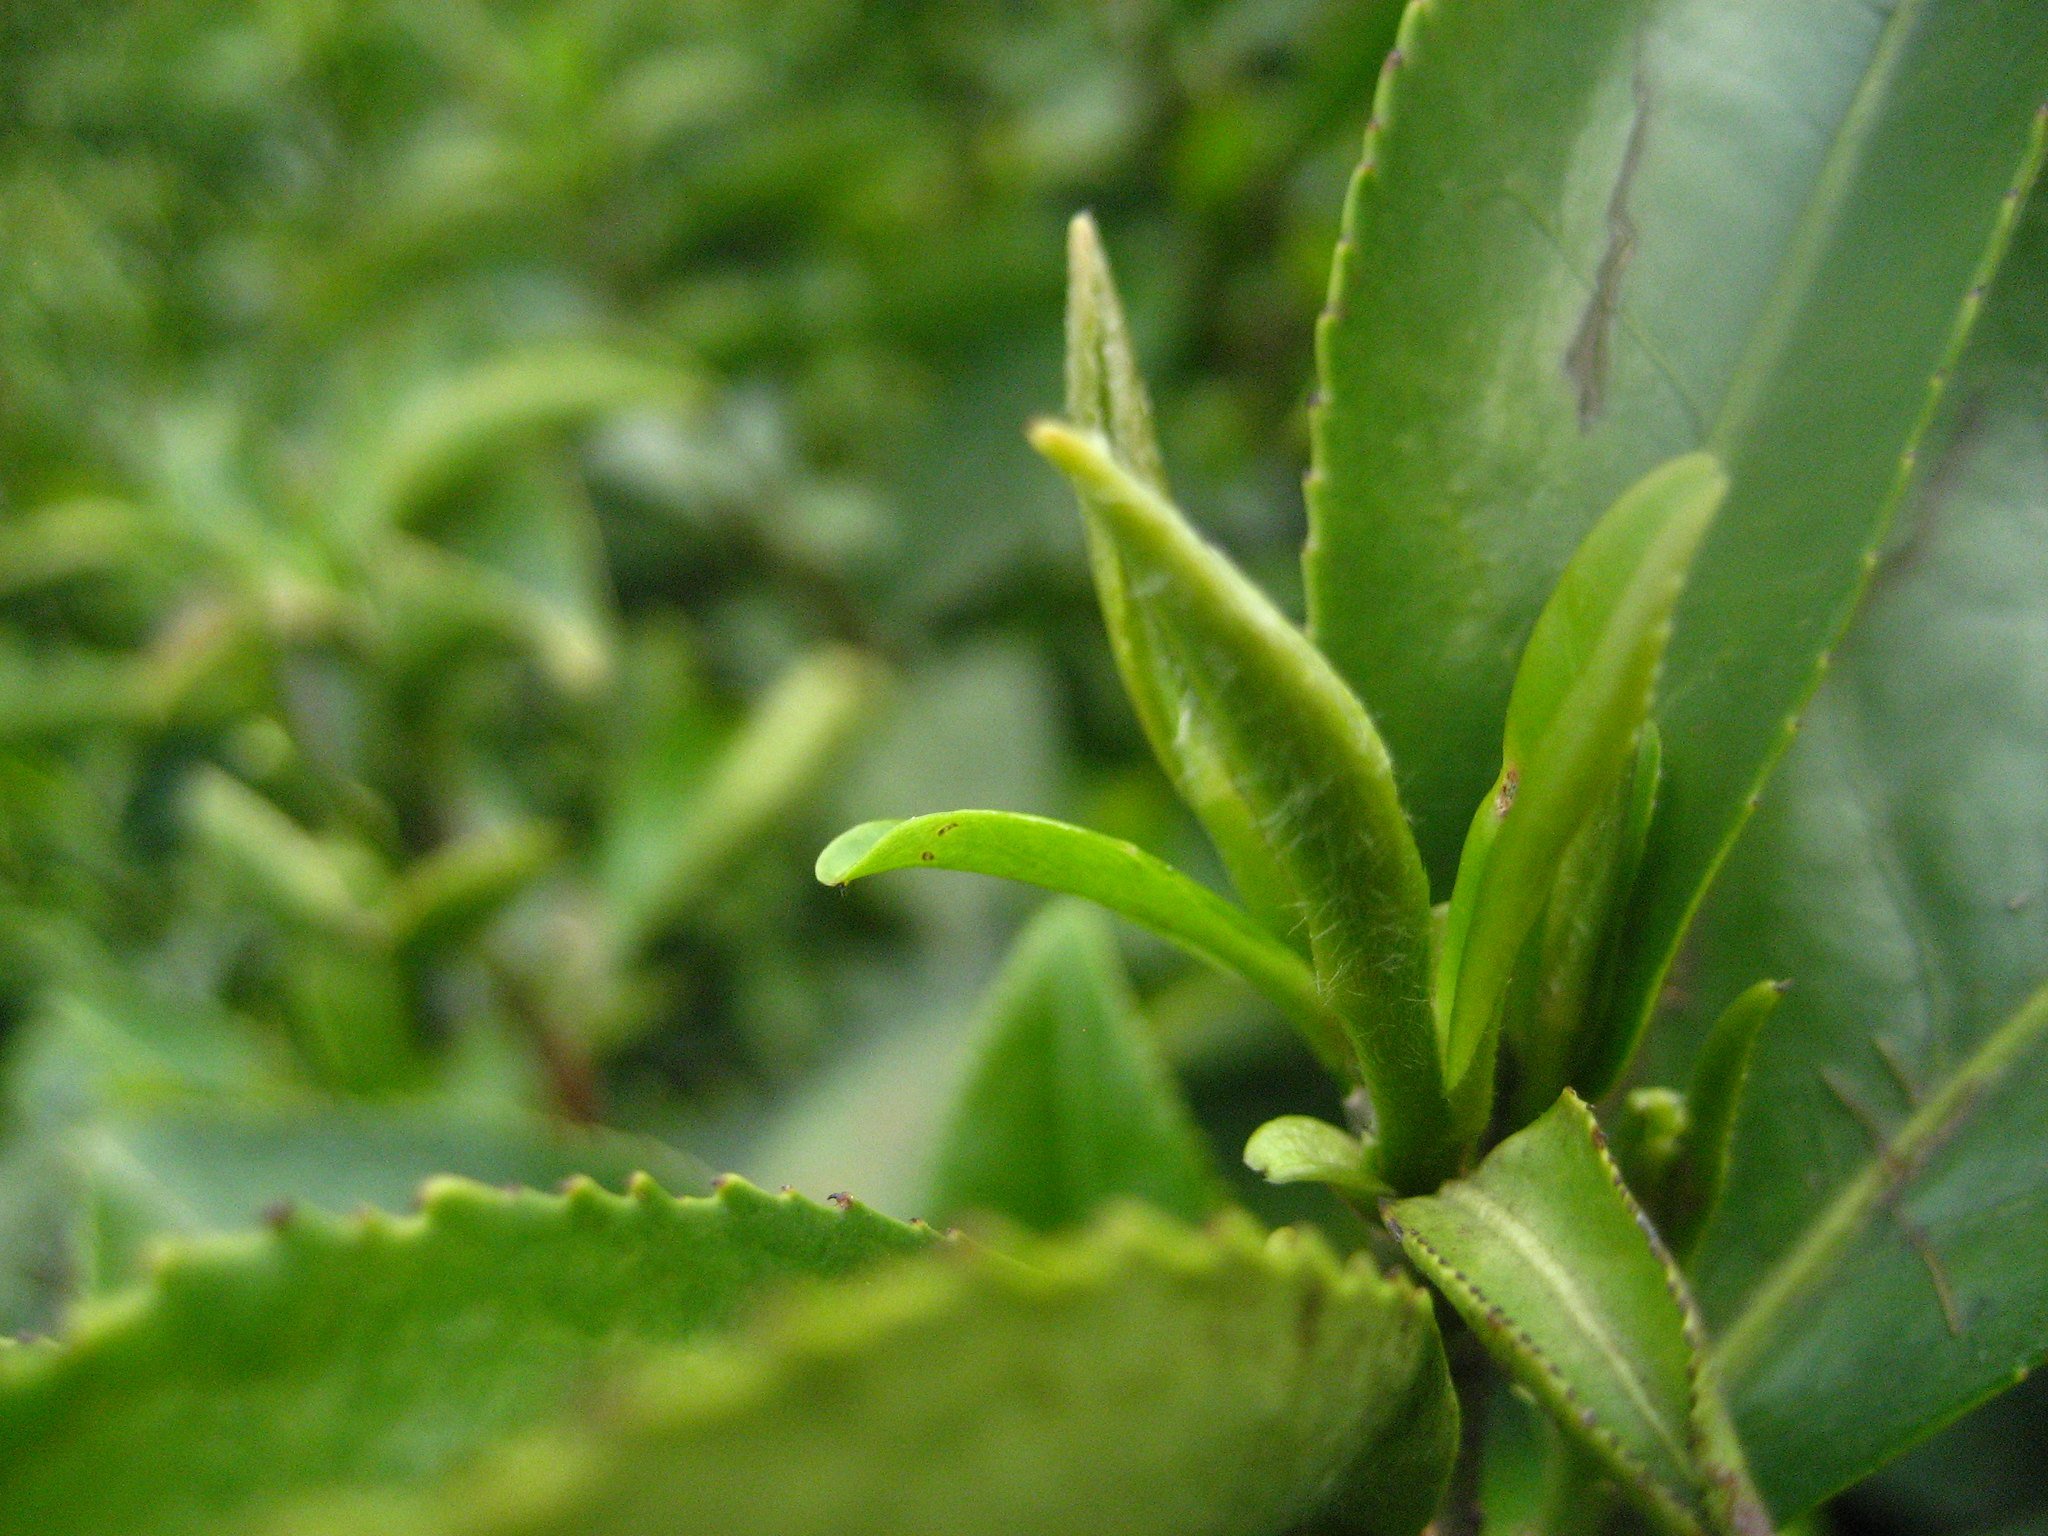 Close-up on the Tea Buds Being Harvested